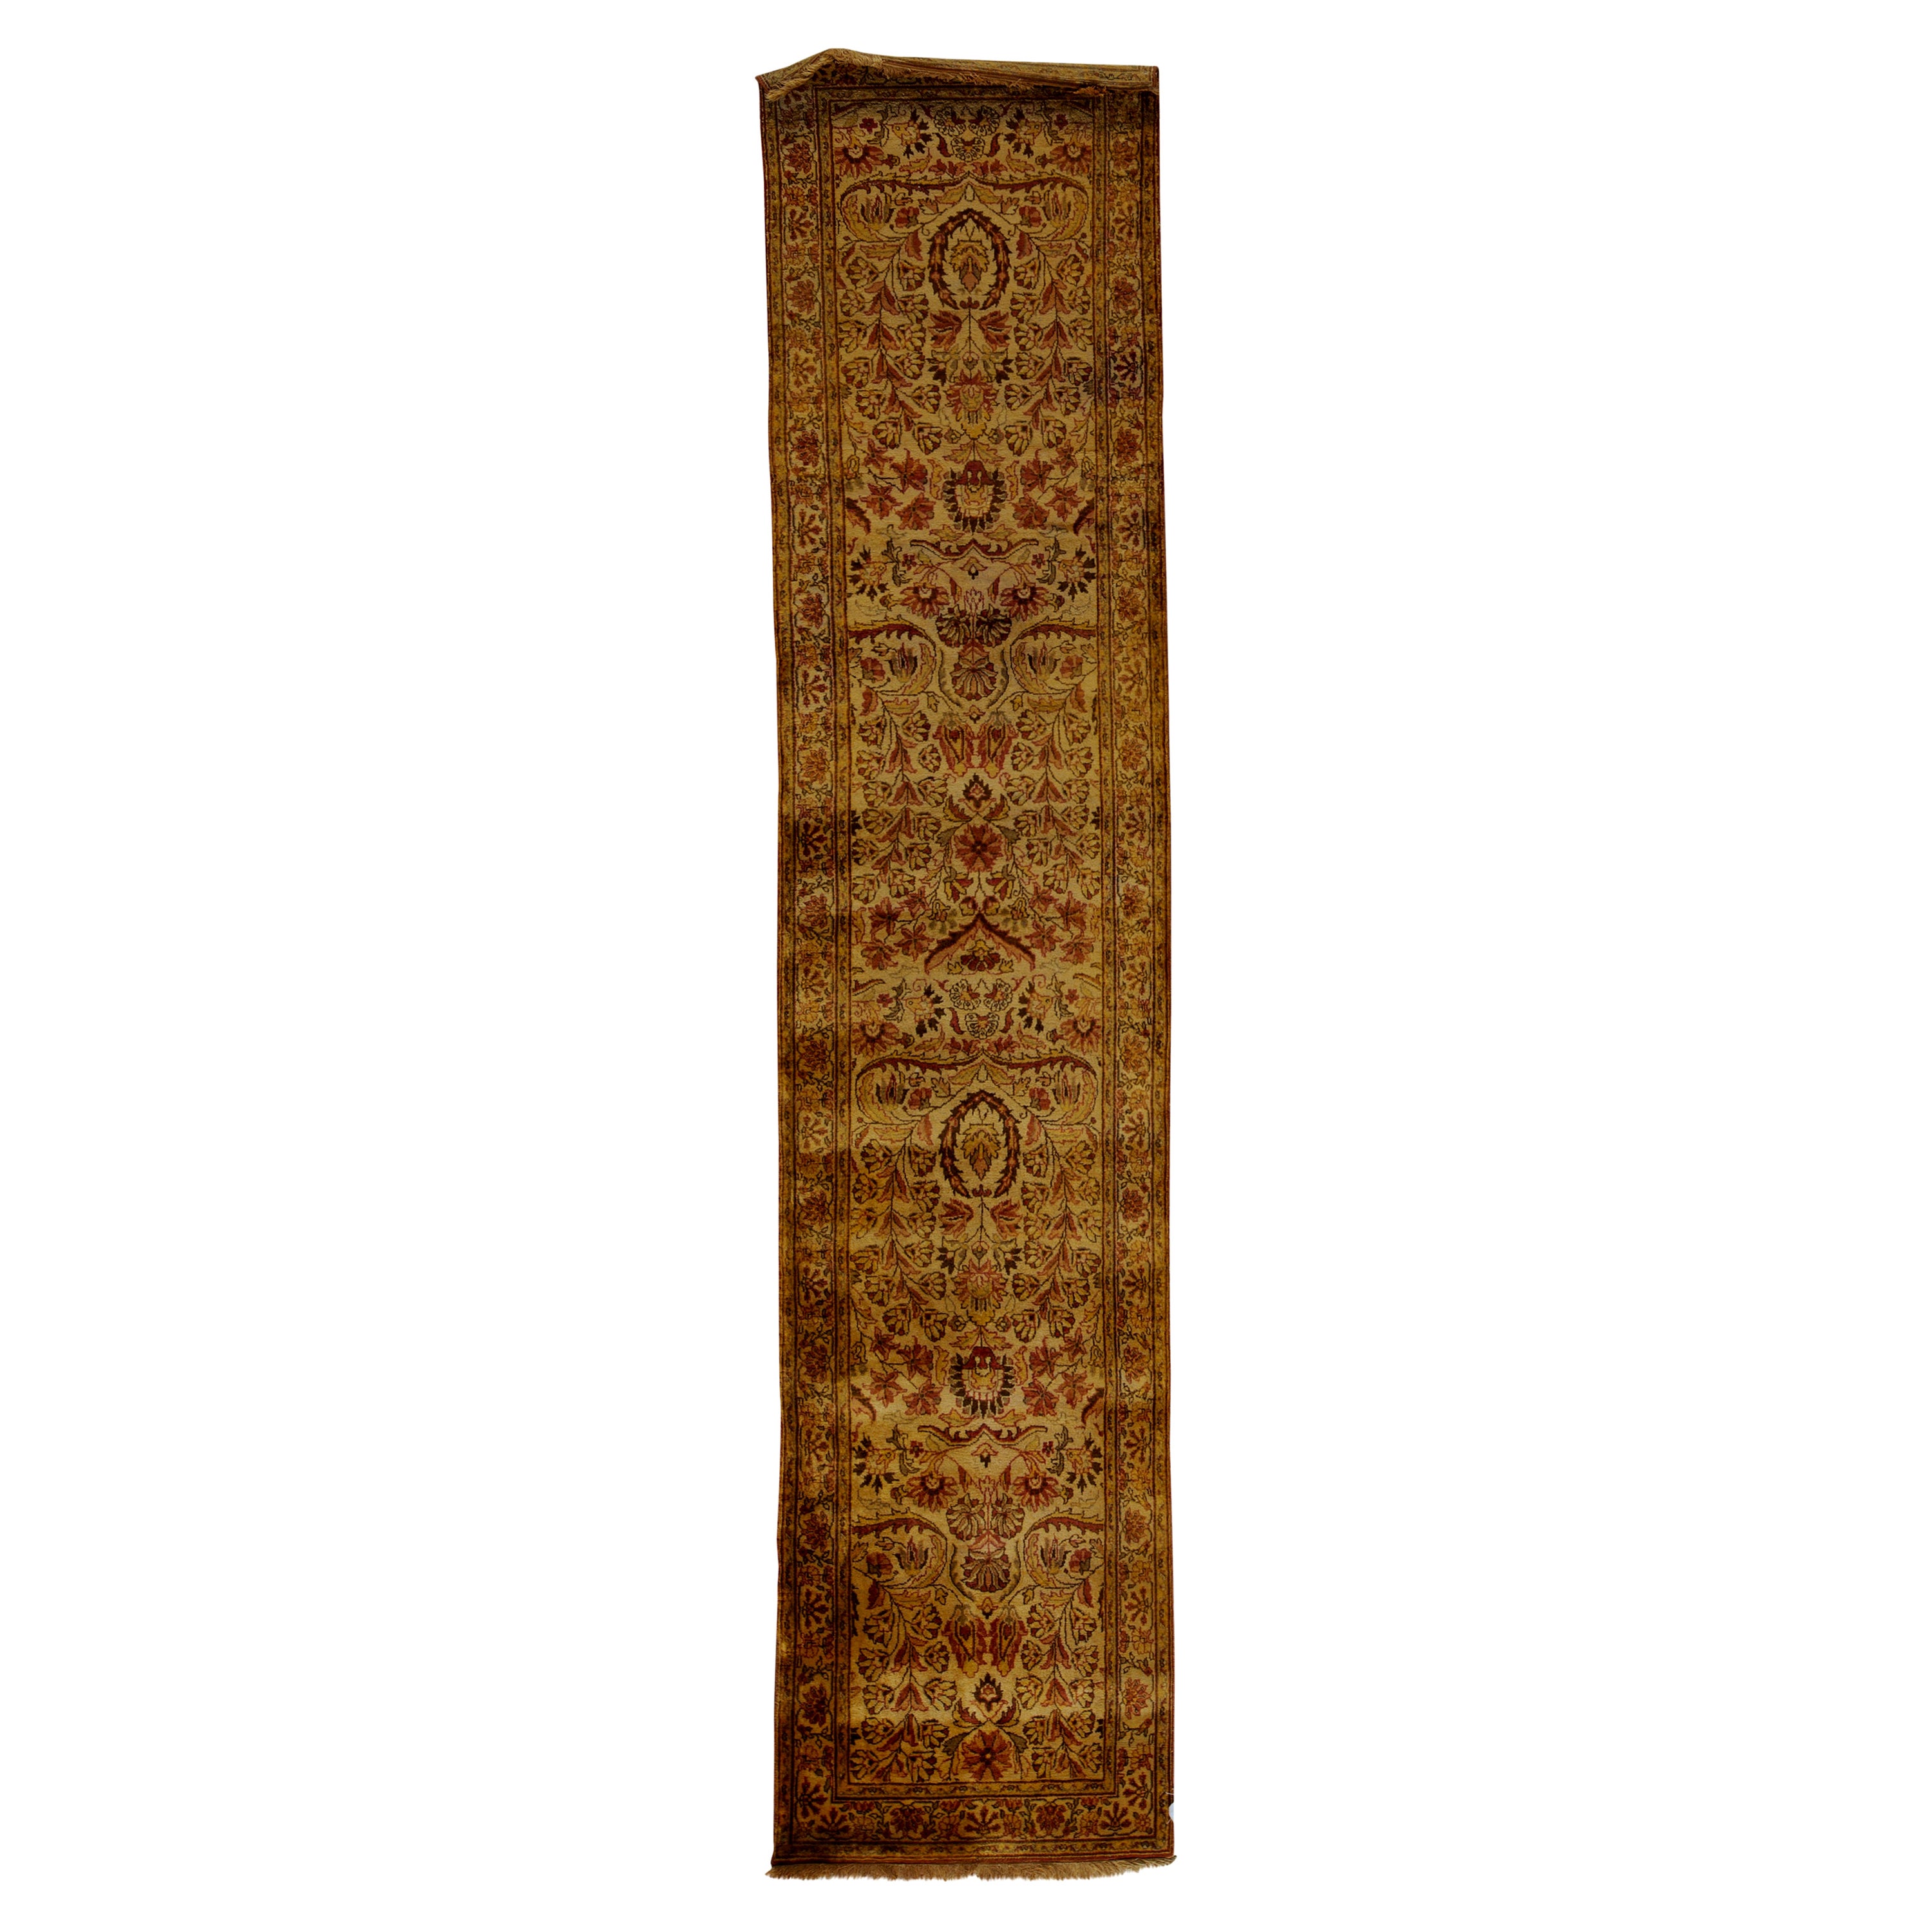   Antique Persian Fine Traditional Handwoven Luxury Wool Beige Runner For Sale